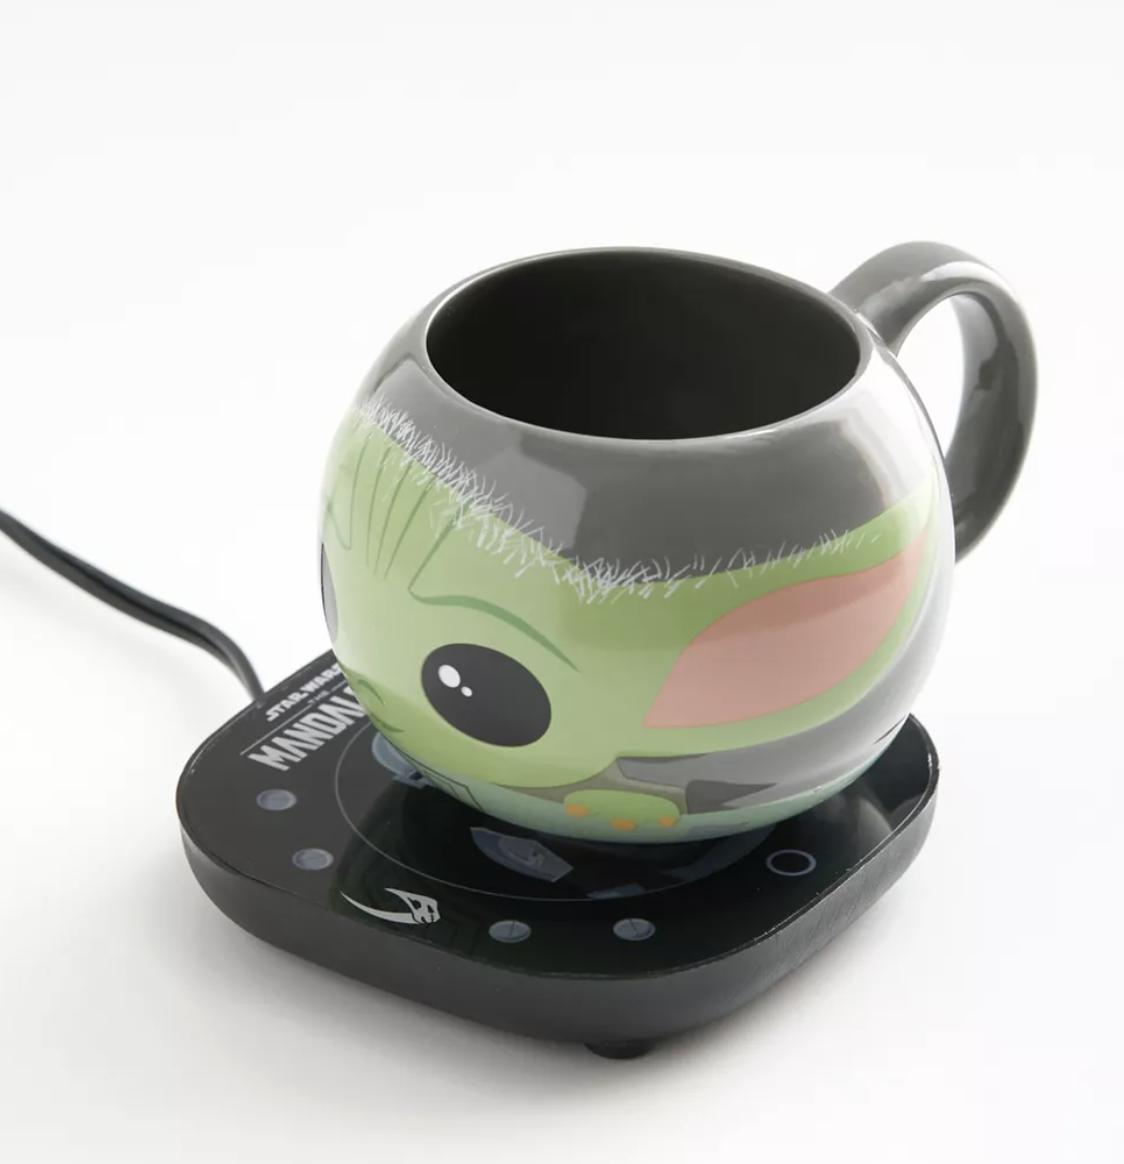 the mug on the warmer in front of a plain background